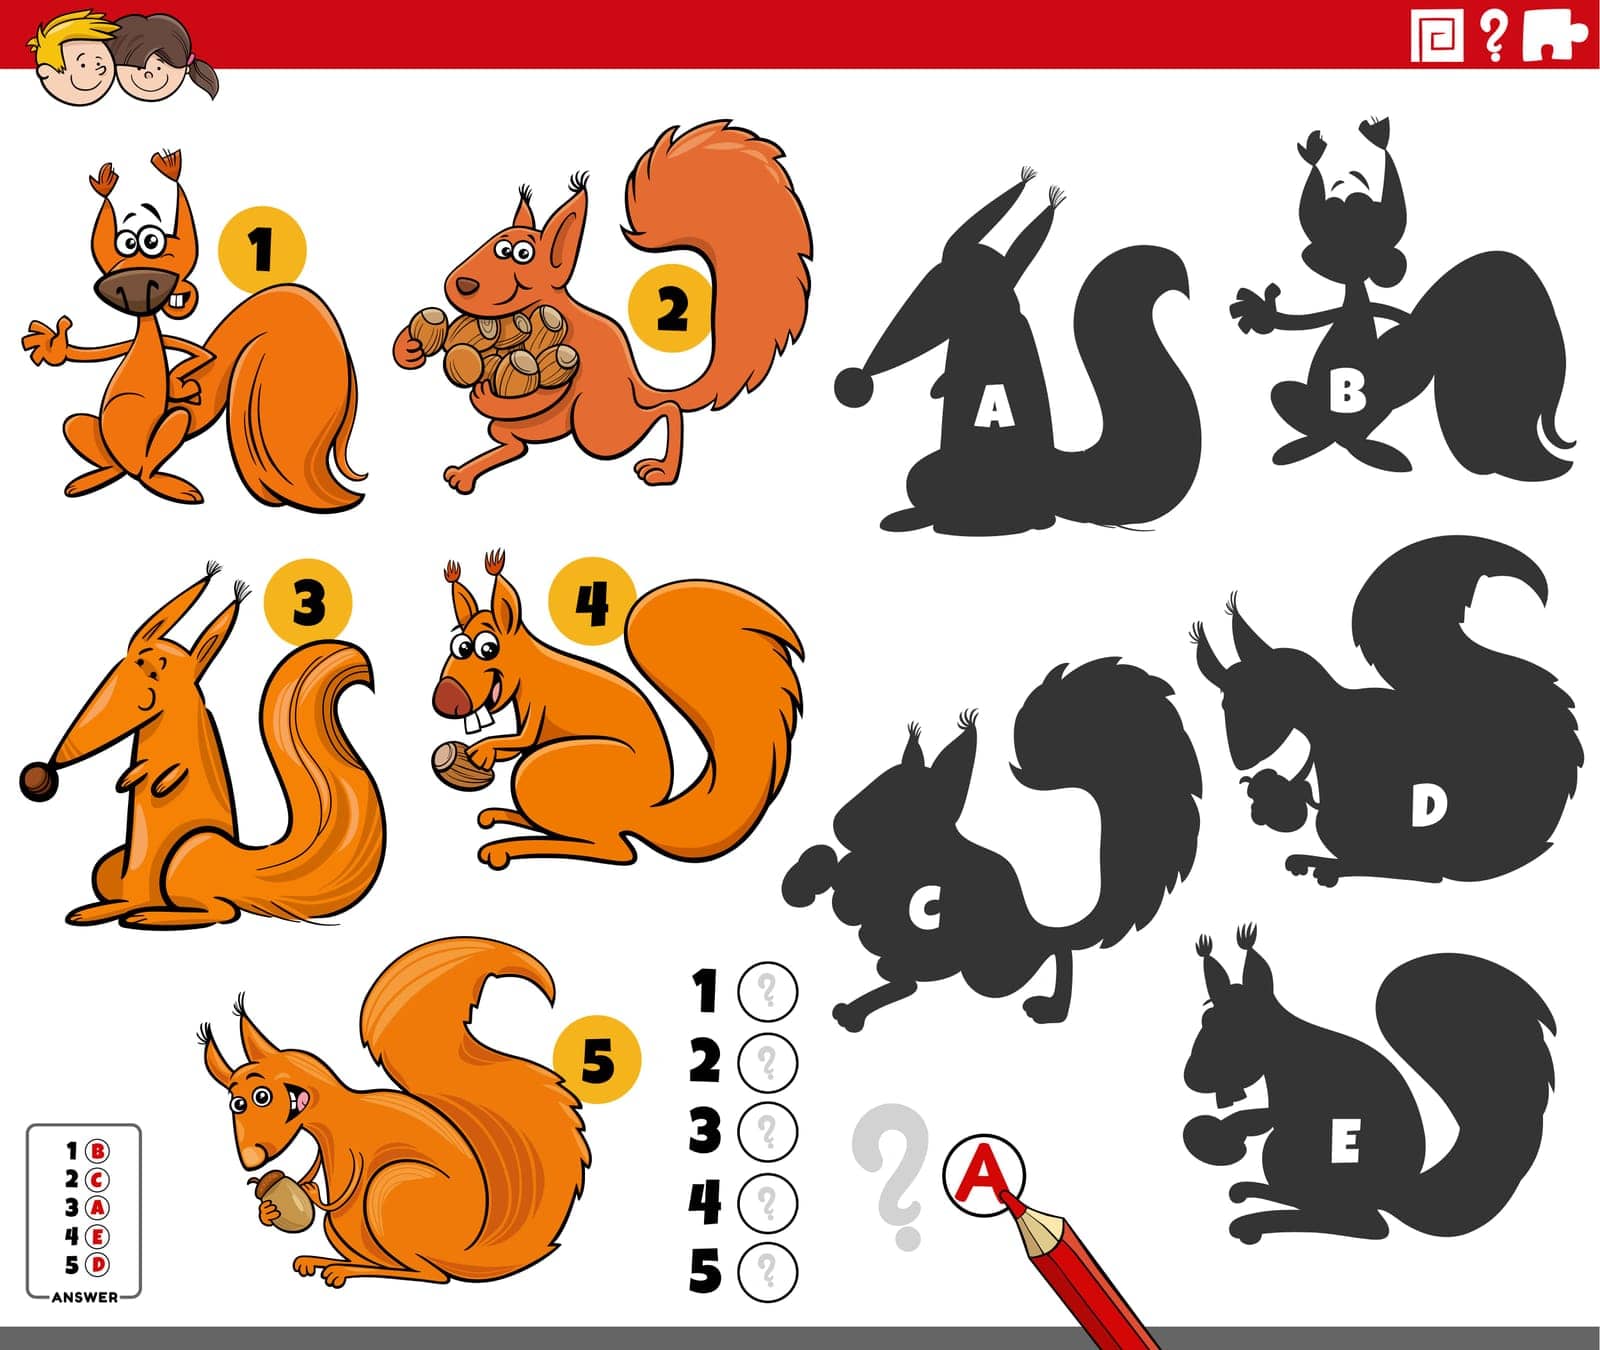 Cartoon illustration of finding the right shadows to the pictures educational game with squirrels animal characters